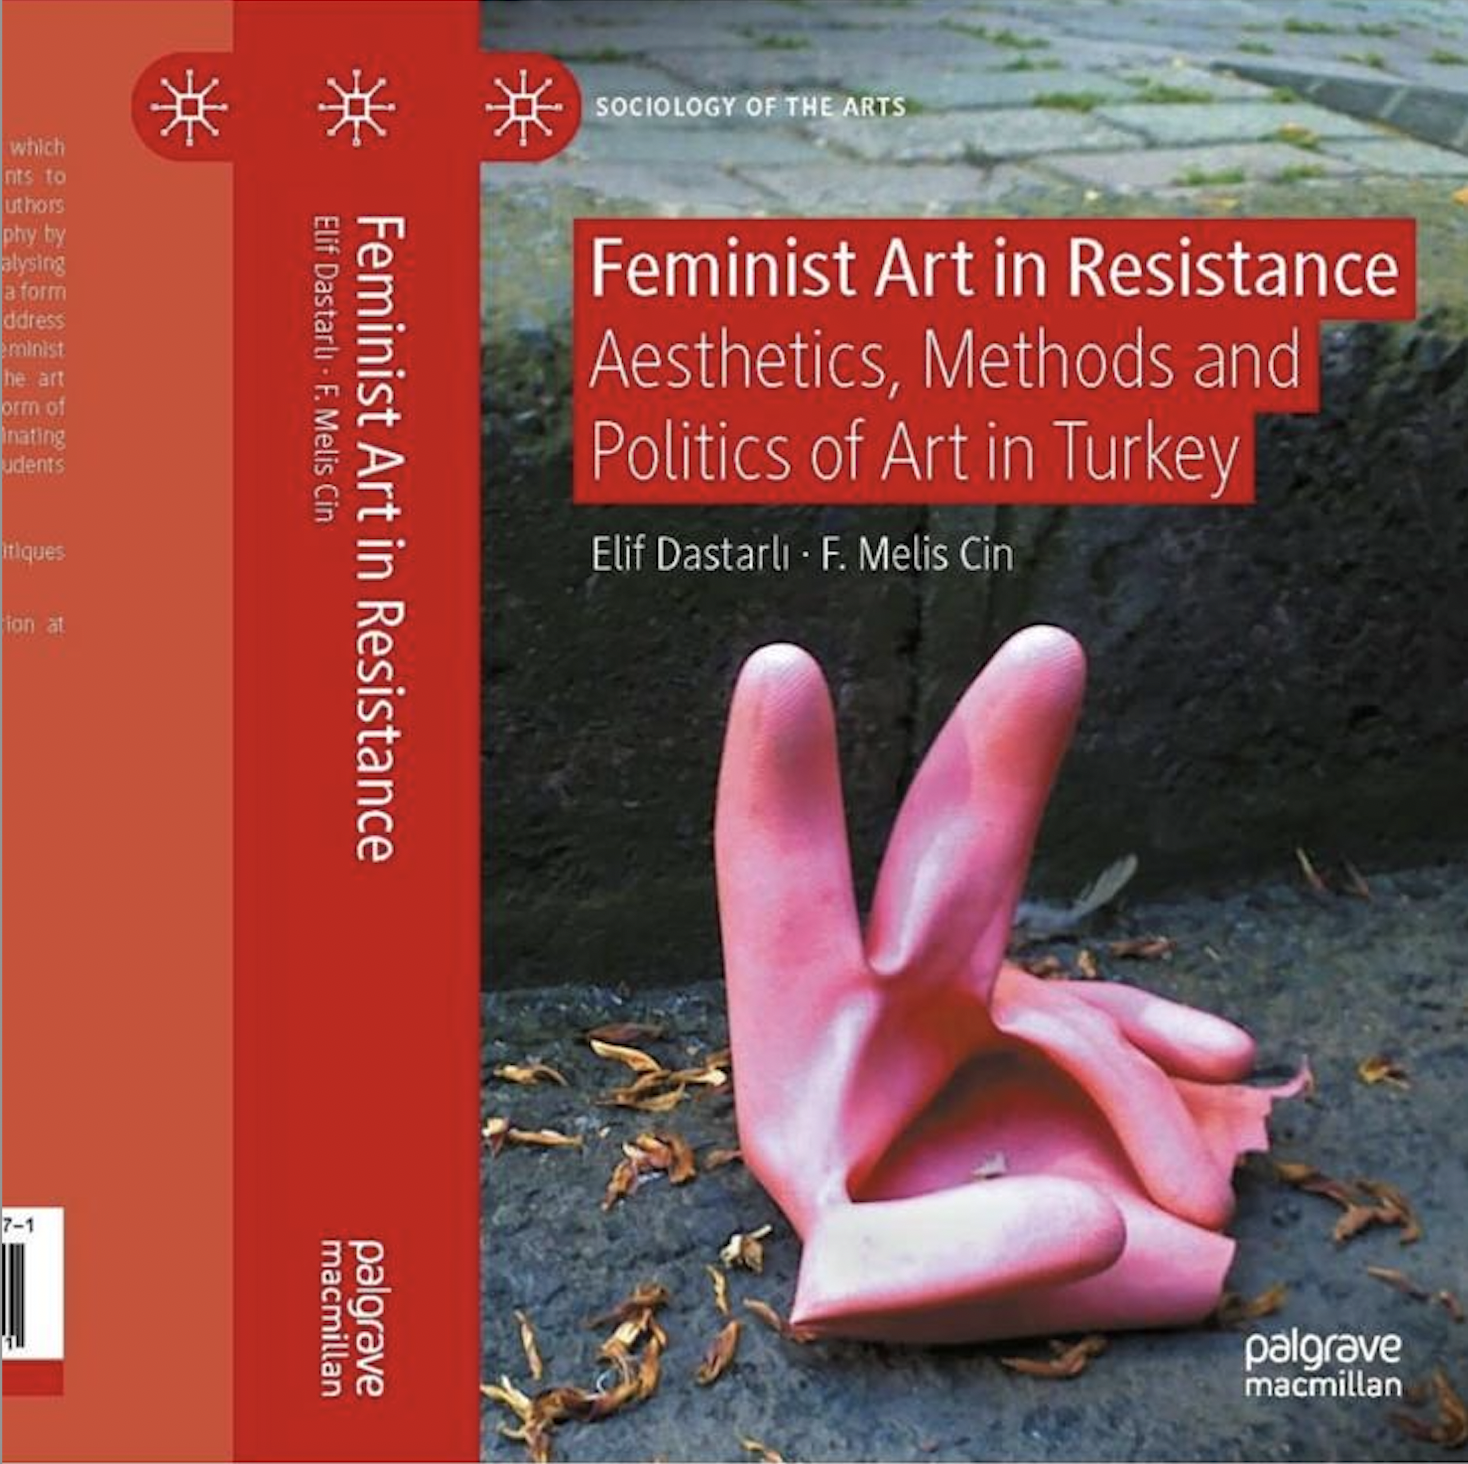 Neriman Polat's work was featured in the book Feminist Art in Resistance (05/11/2022)